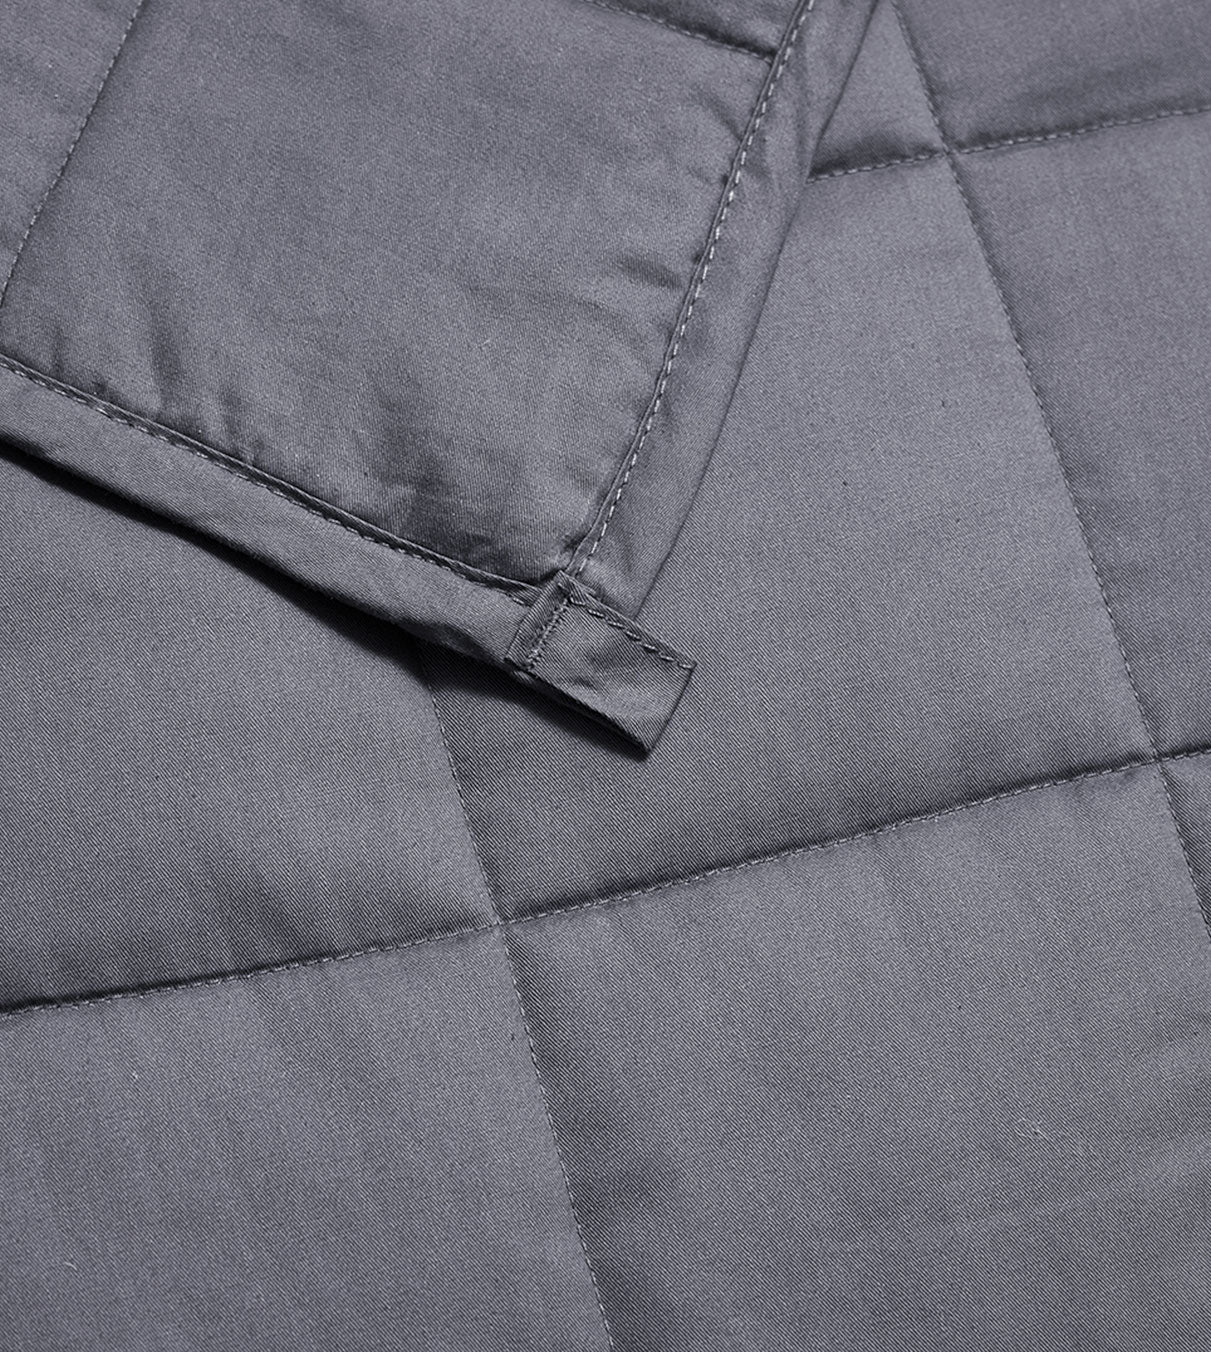 Product: Kids Original Cotton Weighted Blanket | Color: Charcoal_